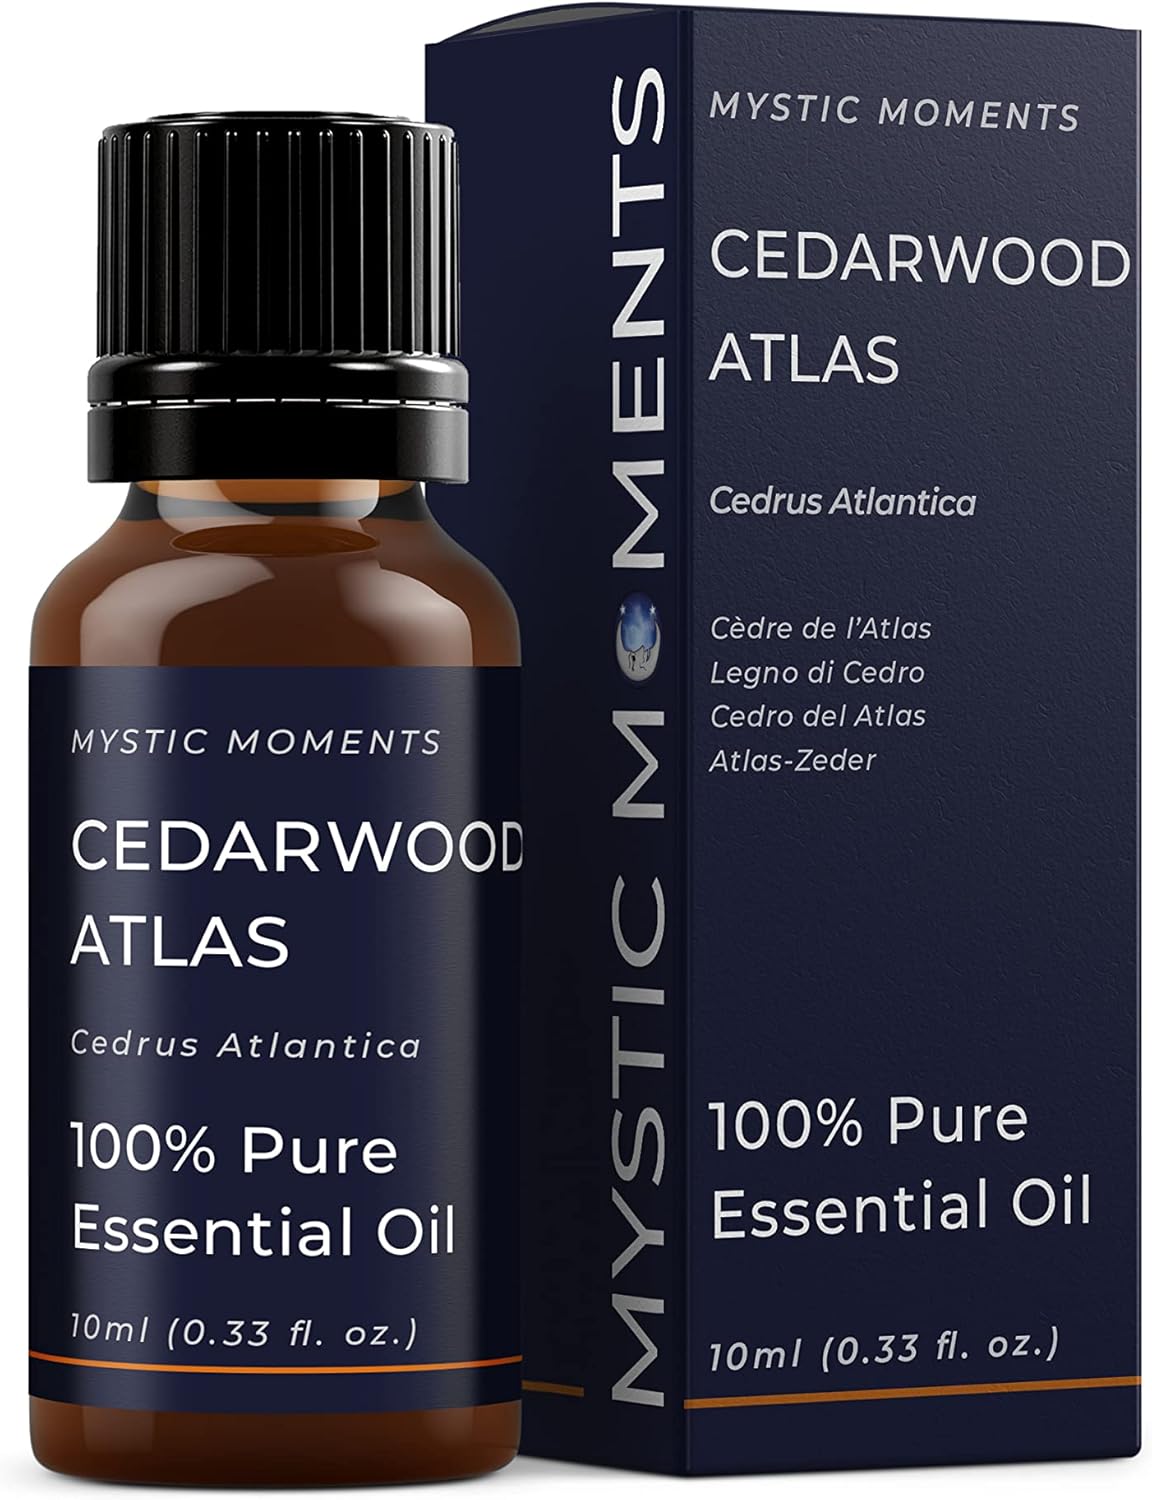 Mystic Moments | Cedarwood Atlas Essential Oil 10ml - Pure & Natural oil for Diffusers, Aromatherapy & Massage Blends Vegan GMO Free